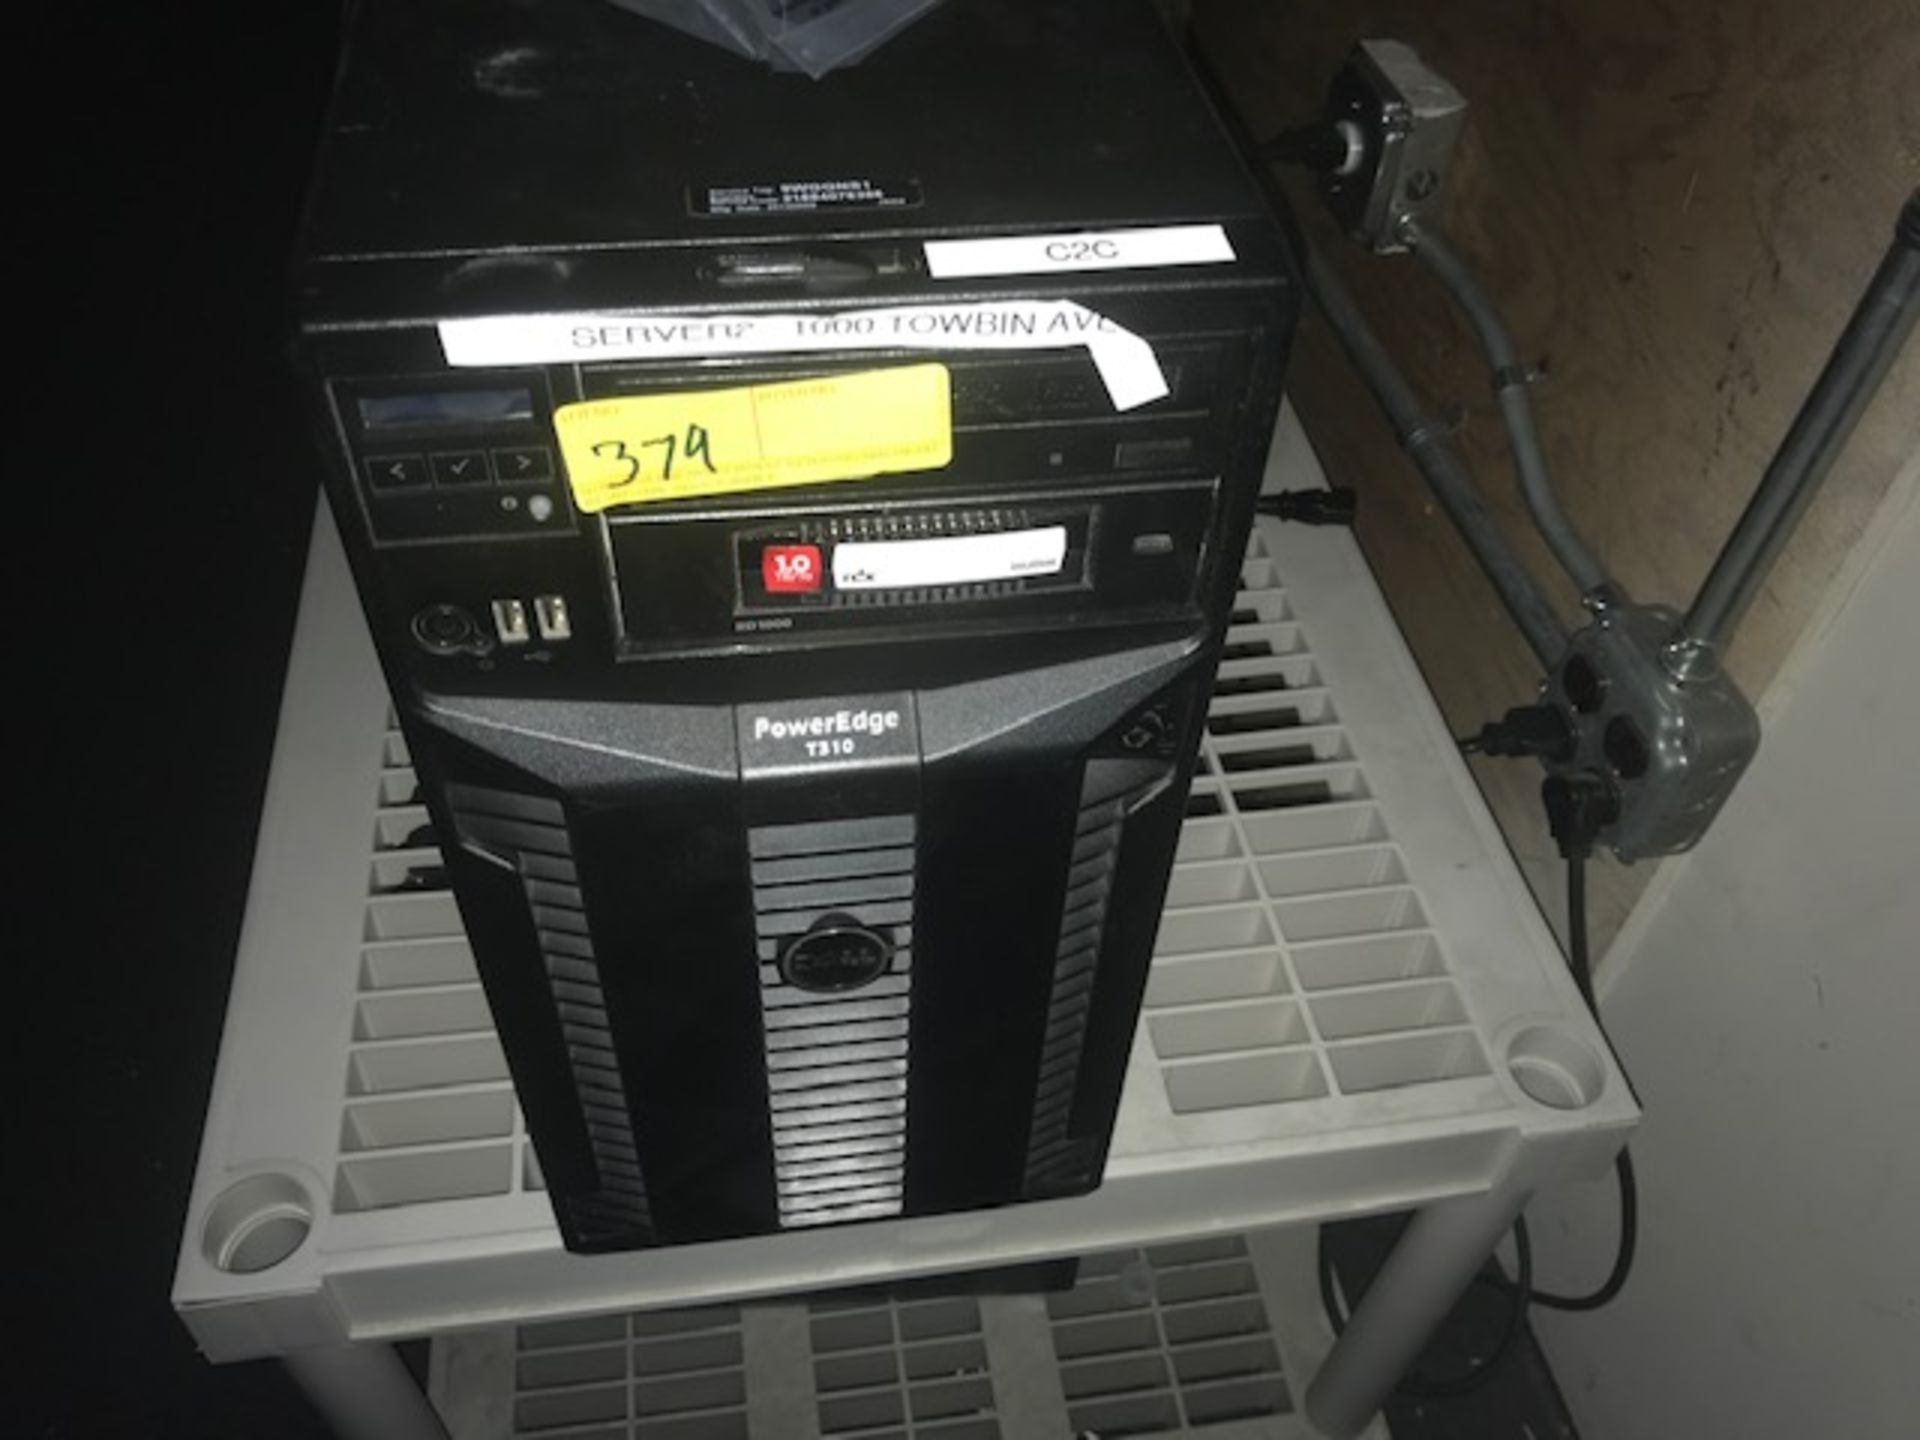 DELL POWEREDGE T-310 SERVER WITH 1- TERABYTE